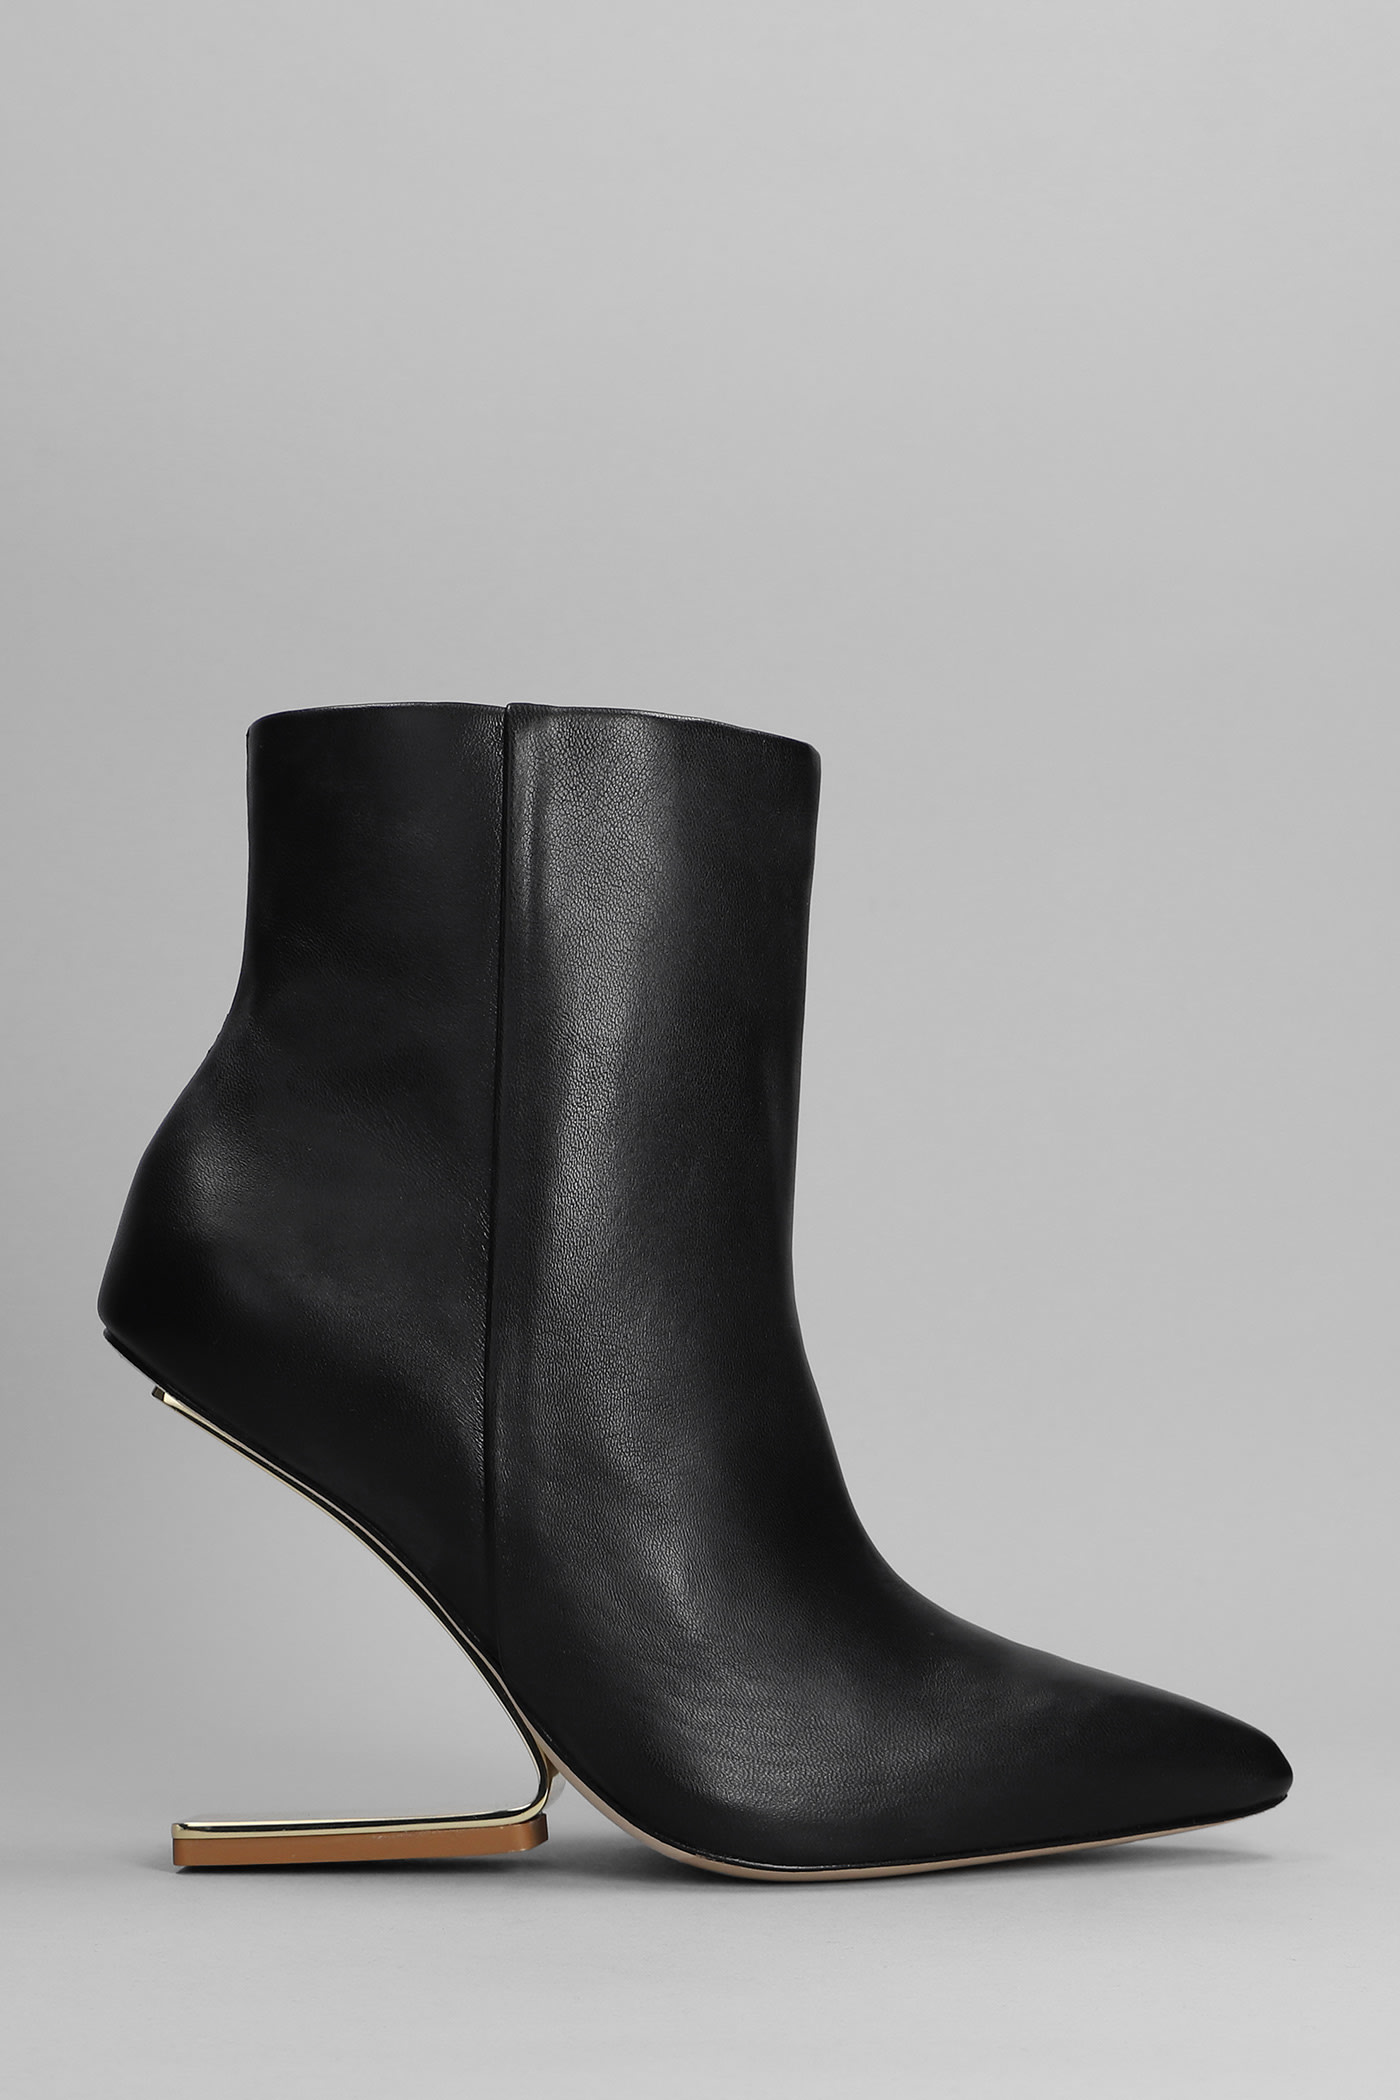 Cult Gaia High Heels Ankle Boots In Black Leather